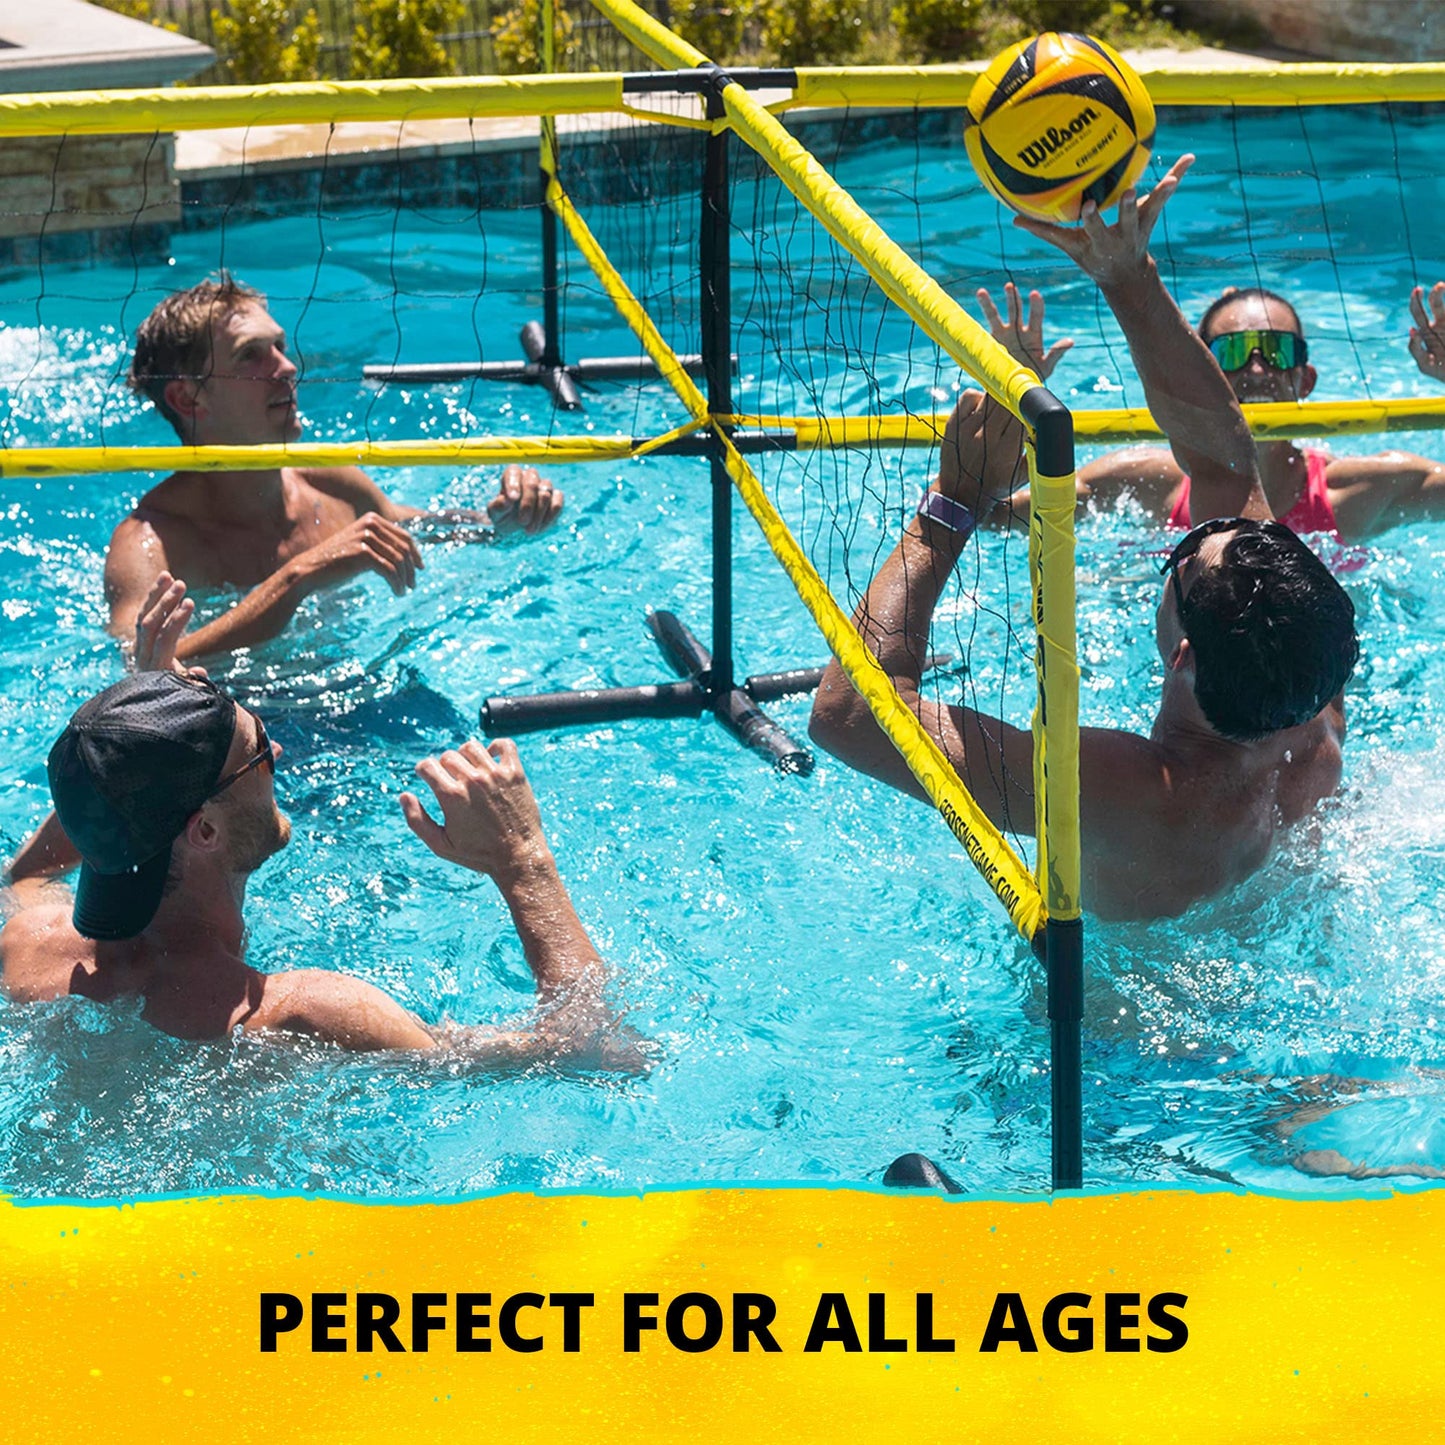 CROSSNET H2O Volleyball Pool Game for Adults and Family - Four Square Net Pool Game - Quick Assemble & Portable - Pool Volleyball Set for Inground Pools - Perfect Pool Toys for All Ages W/Accessories